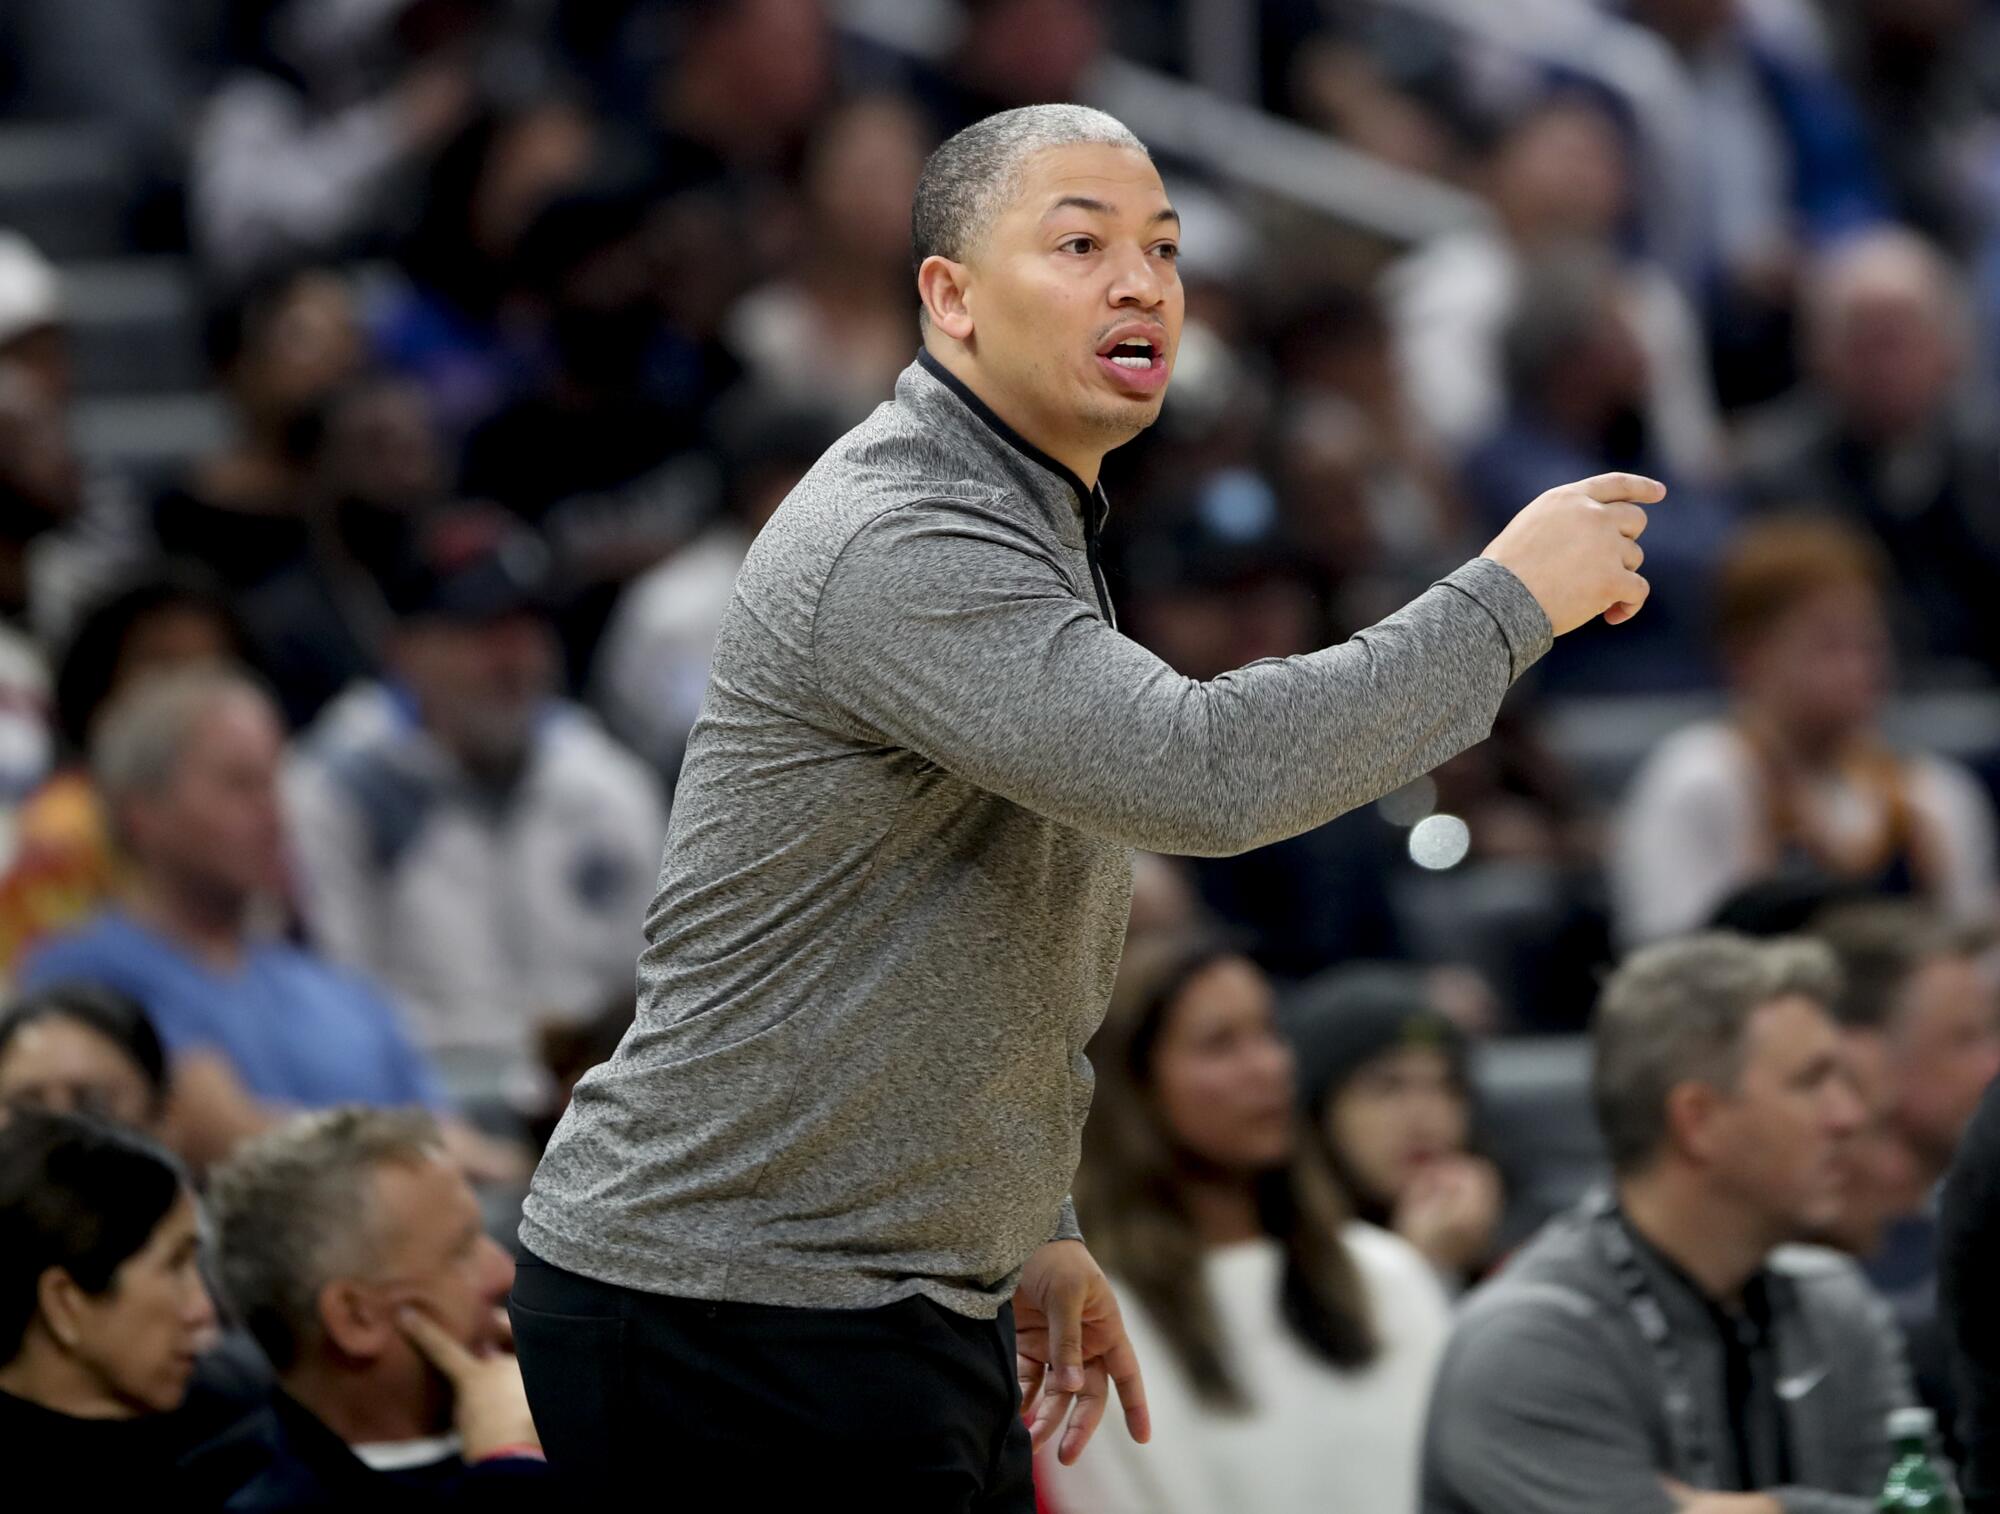 Clippers coach Tyronn Lue points to his right as he yells instructions to players from the sideline.